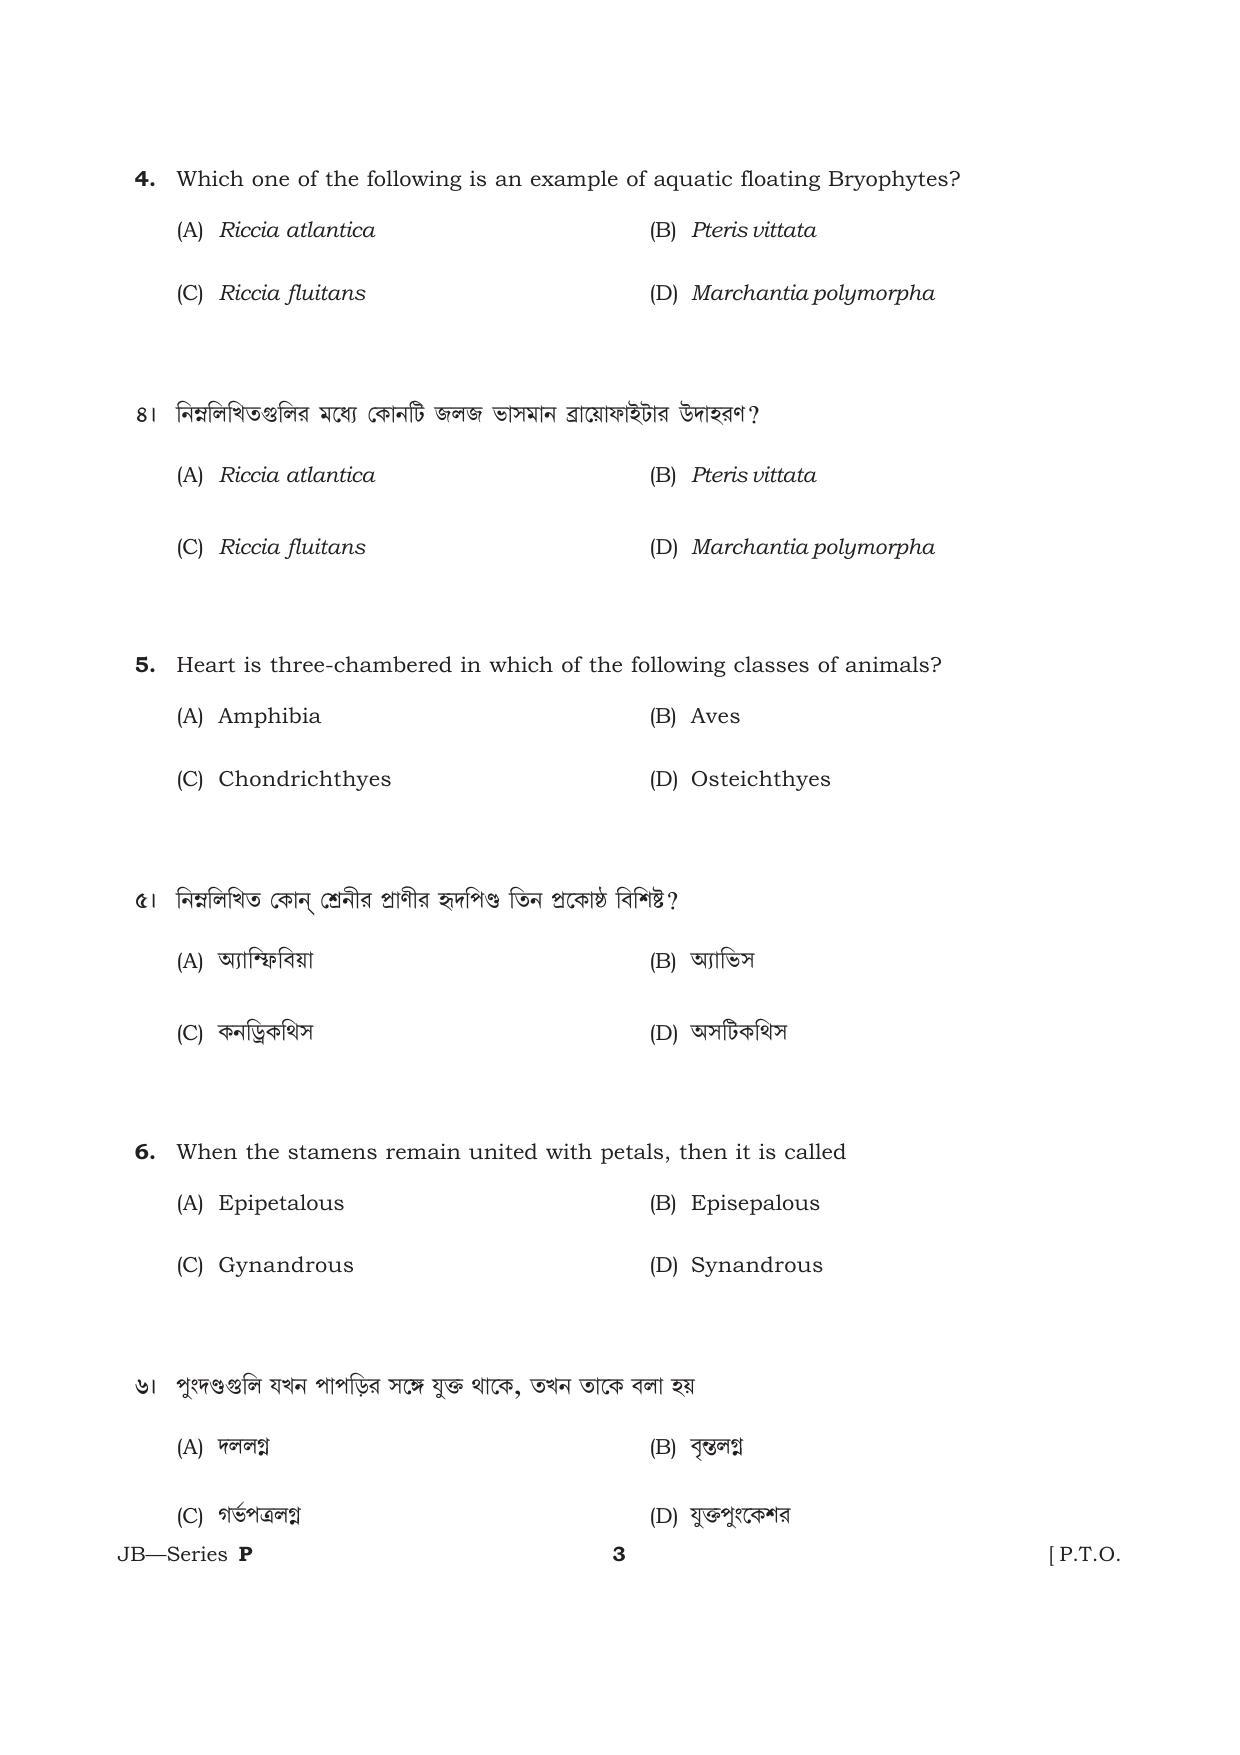 TBJEE Question Paper 2021 - Biology - Page 3